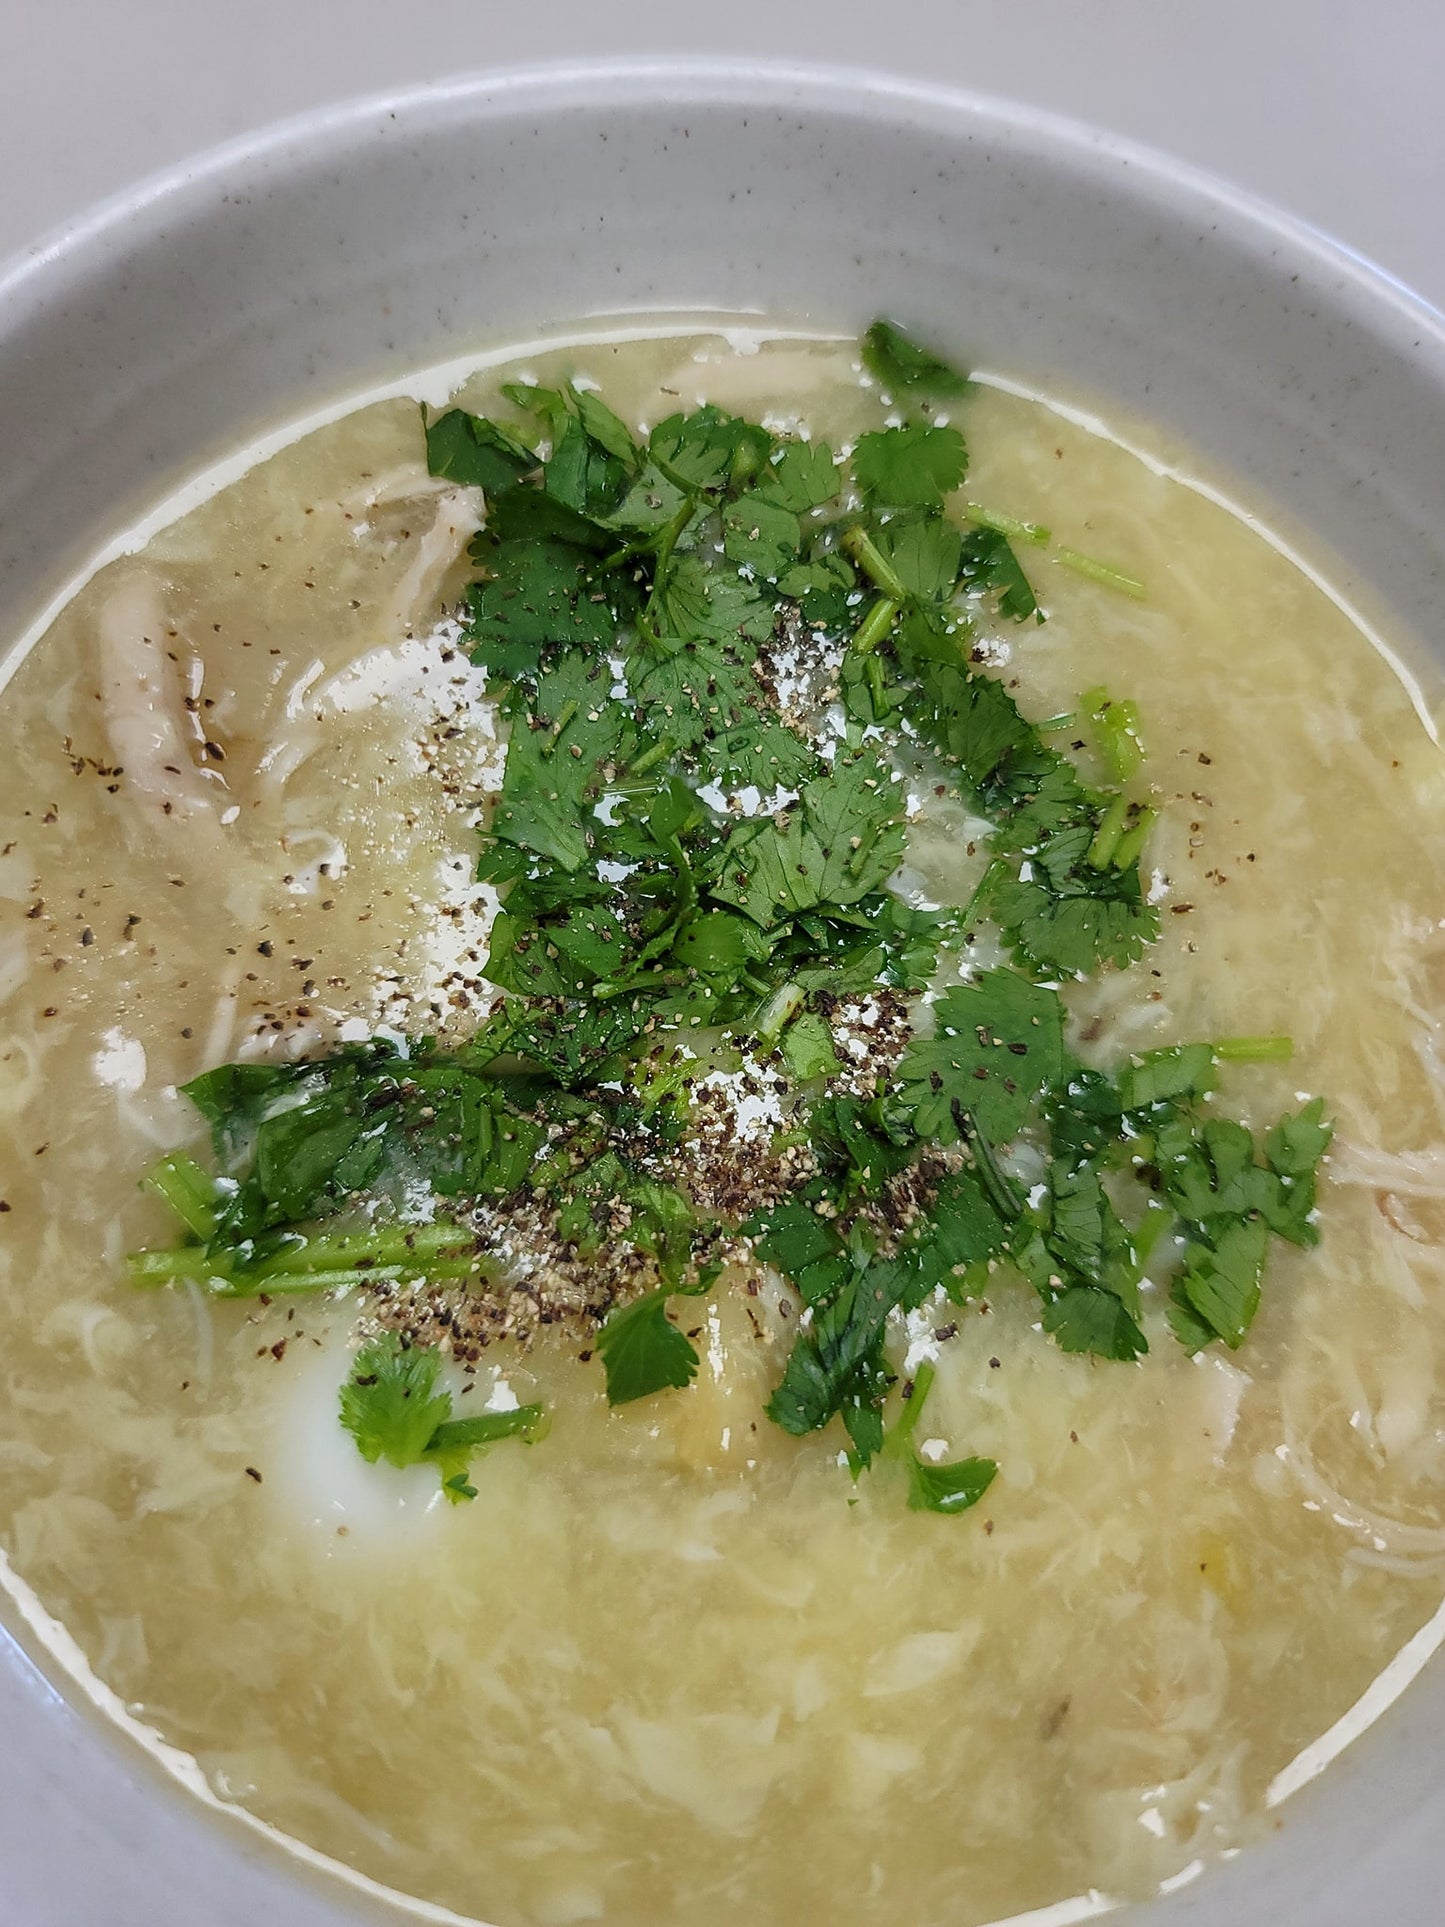 Soup măng cua from LIVE USA Crab (order 24hrs in advance, minimum 10) - Vietnamese Crab and Asparagus Soup